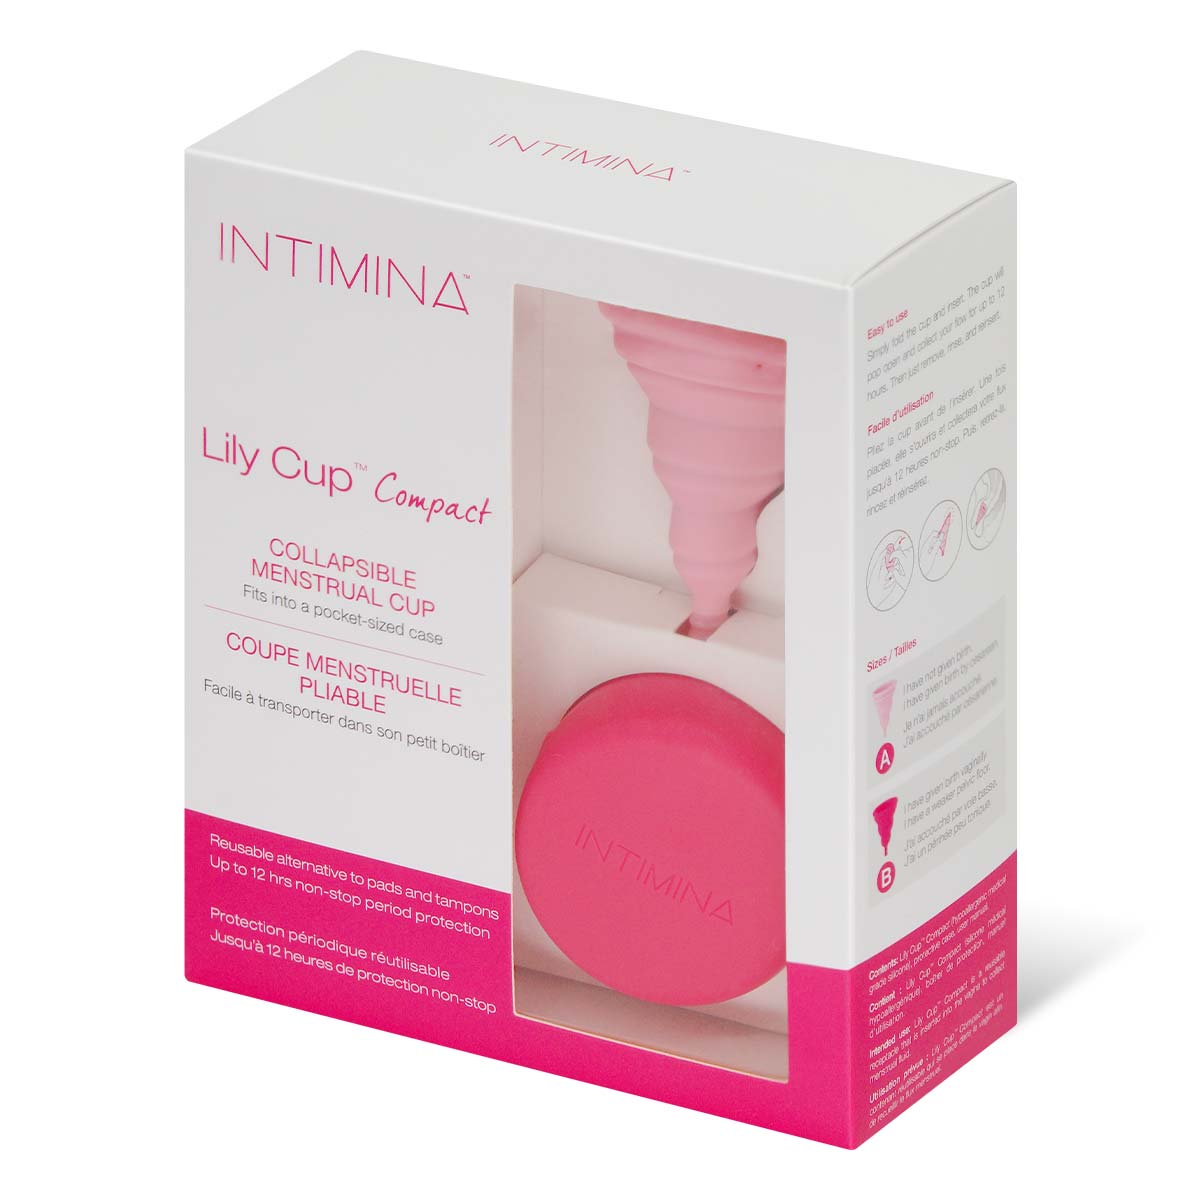 Intimina Lily Cup Compact 摺疊式月經杯 (Size A)-p_1